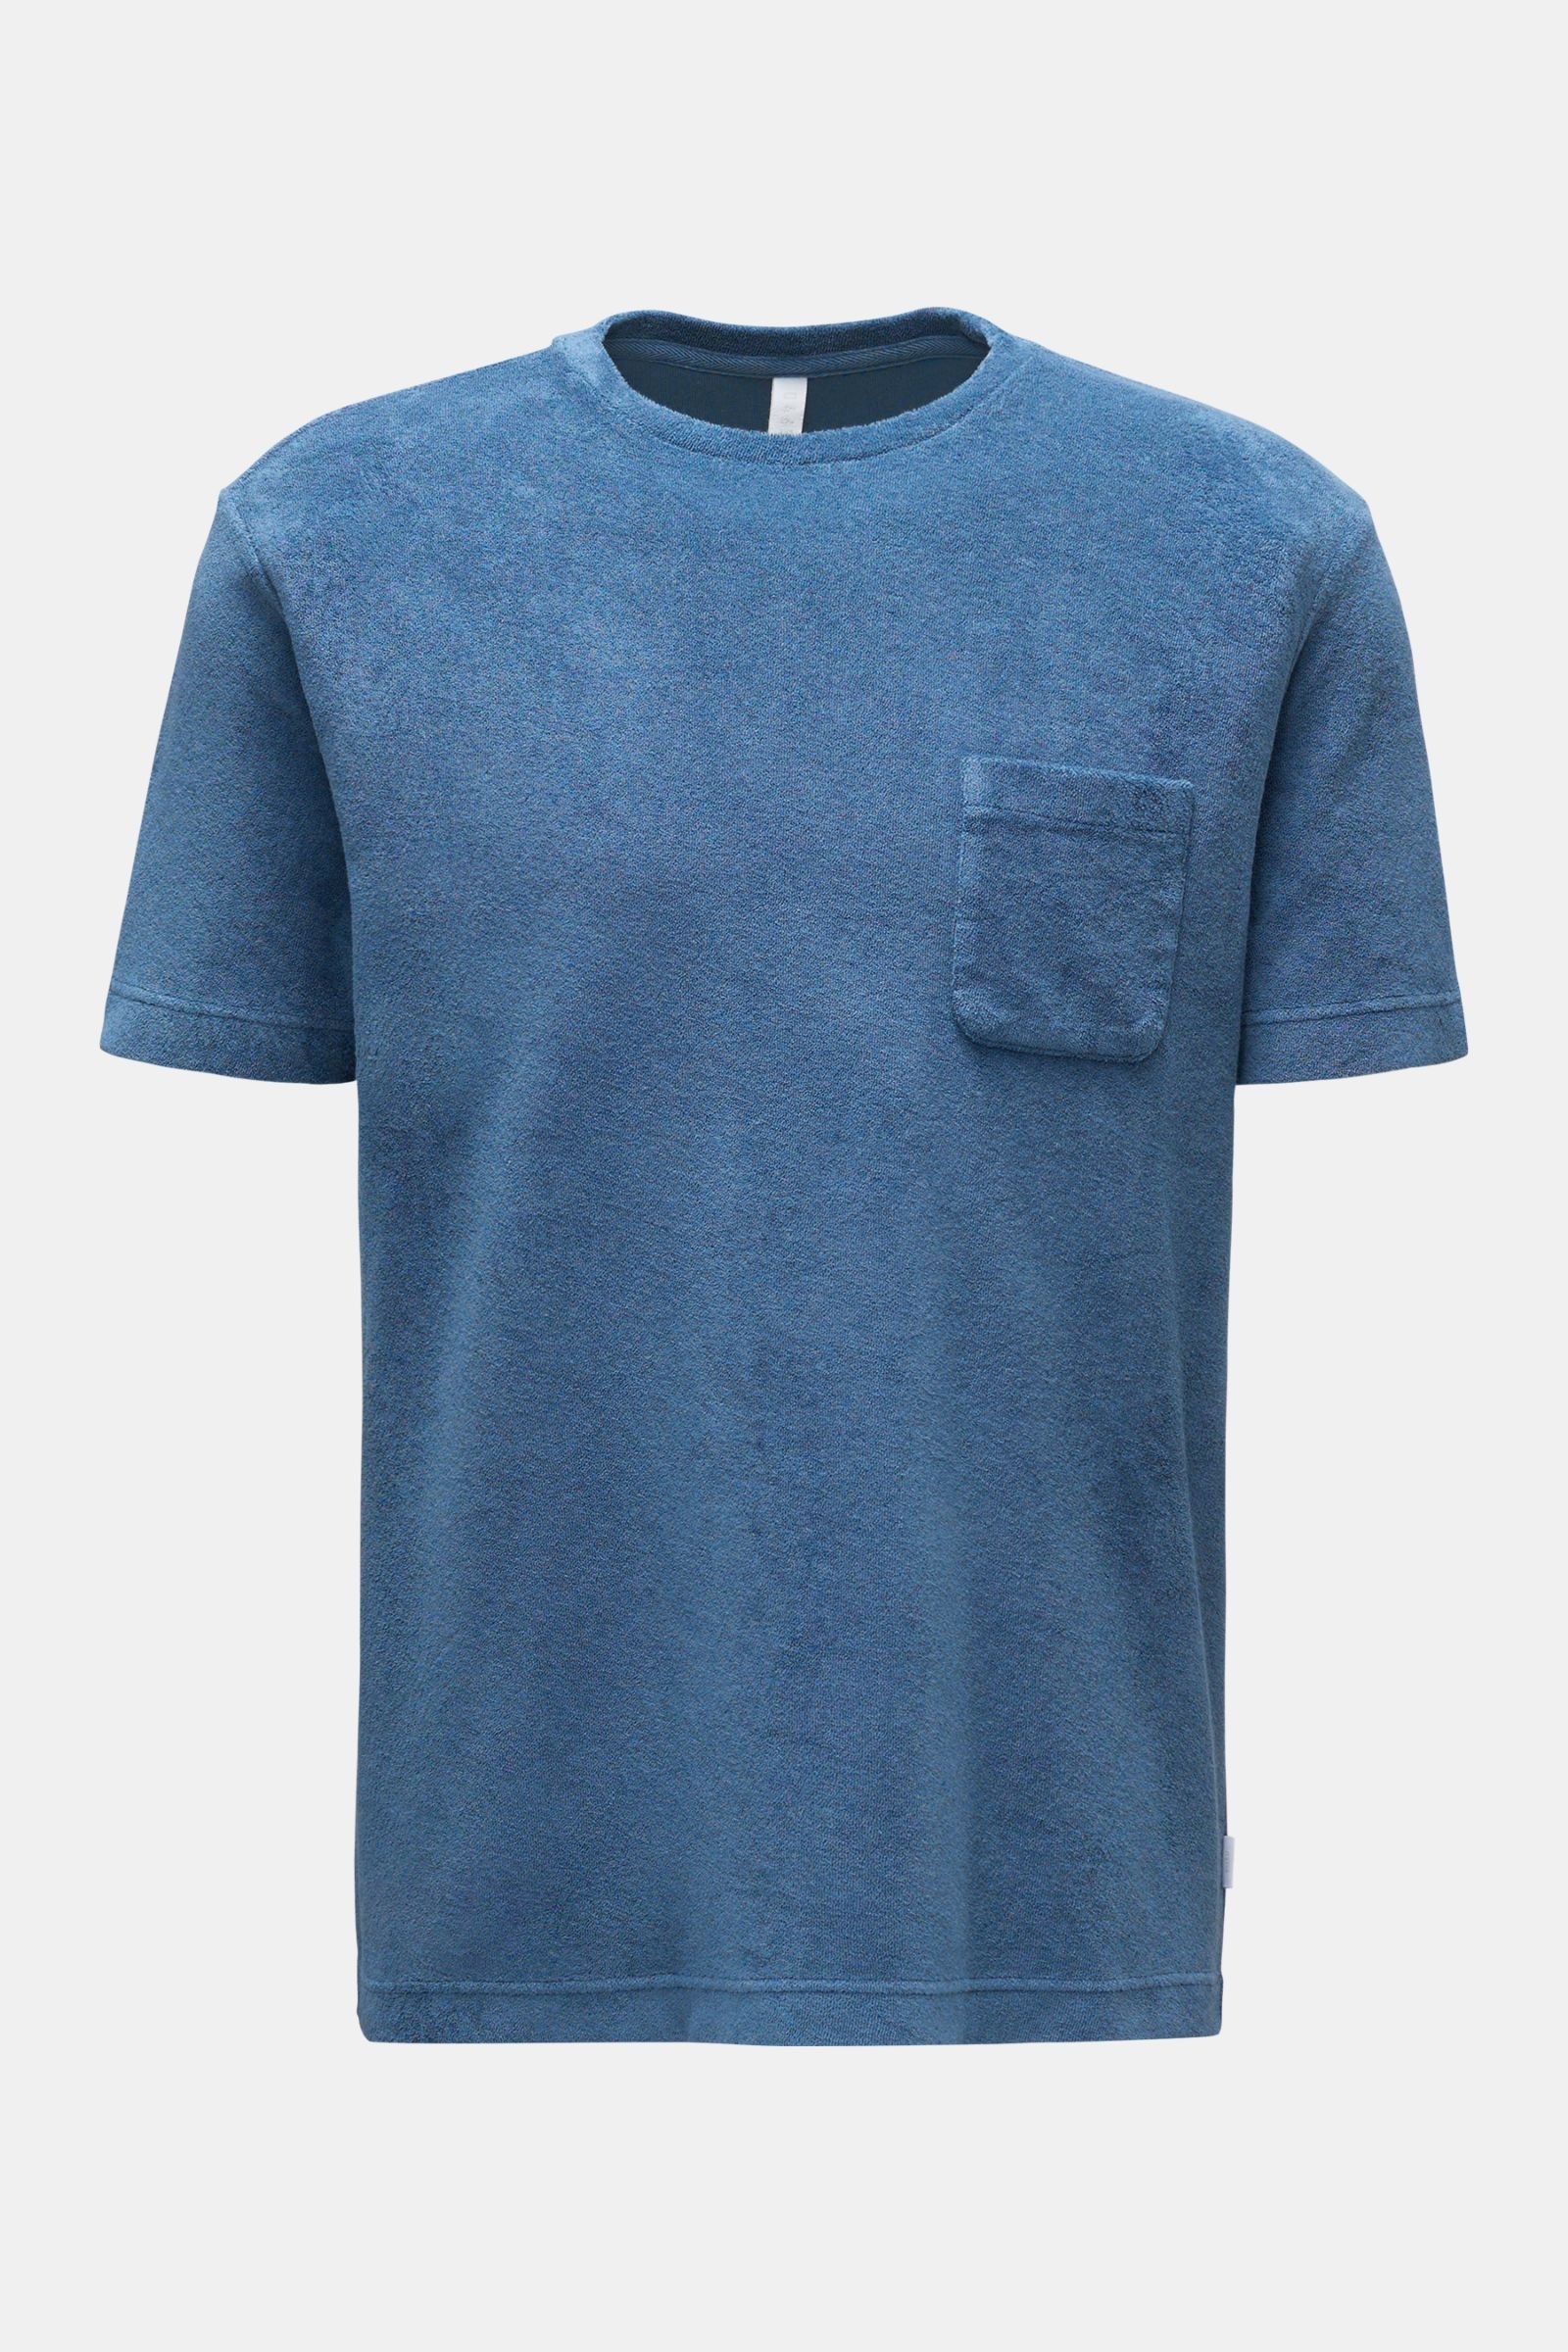 Terry crew neck T-shirt 'Oyster Terry Tee' grey-blue